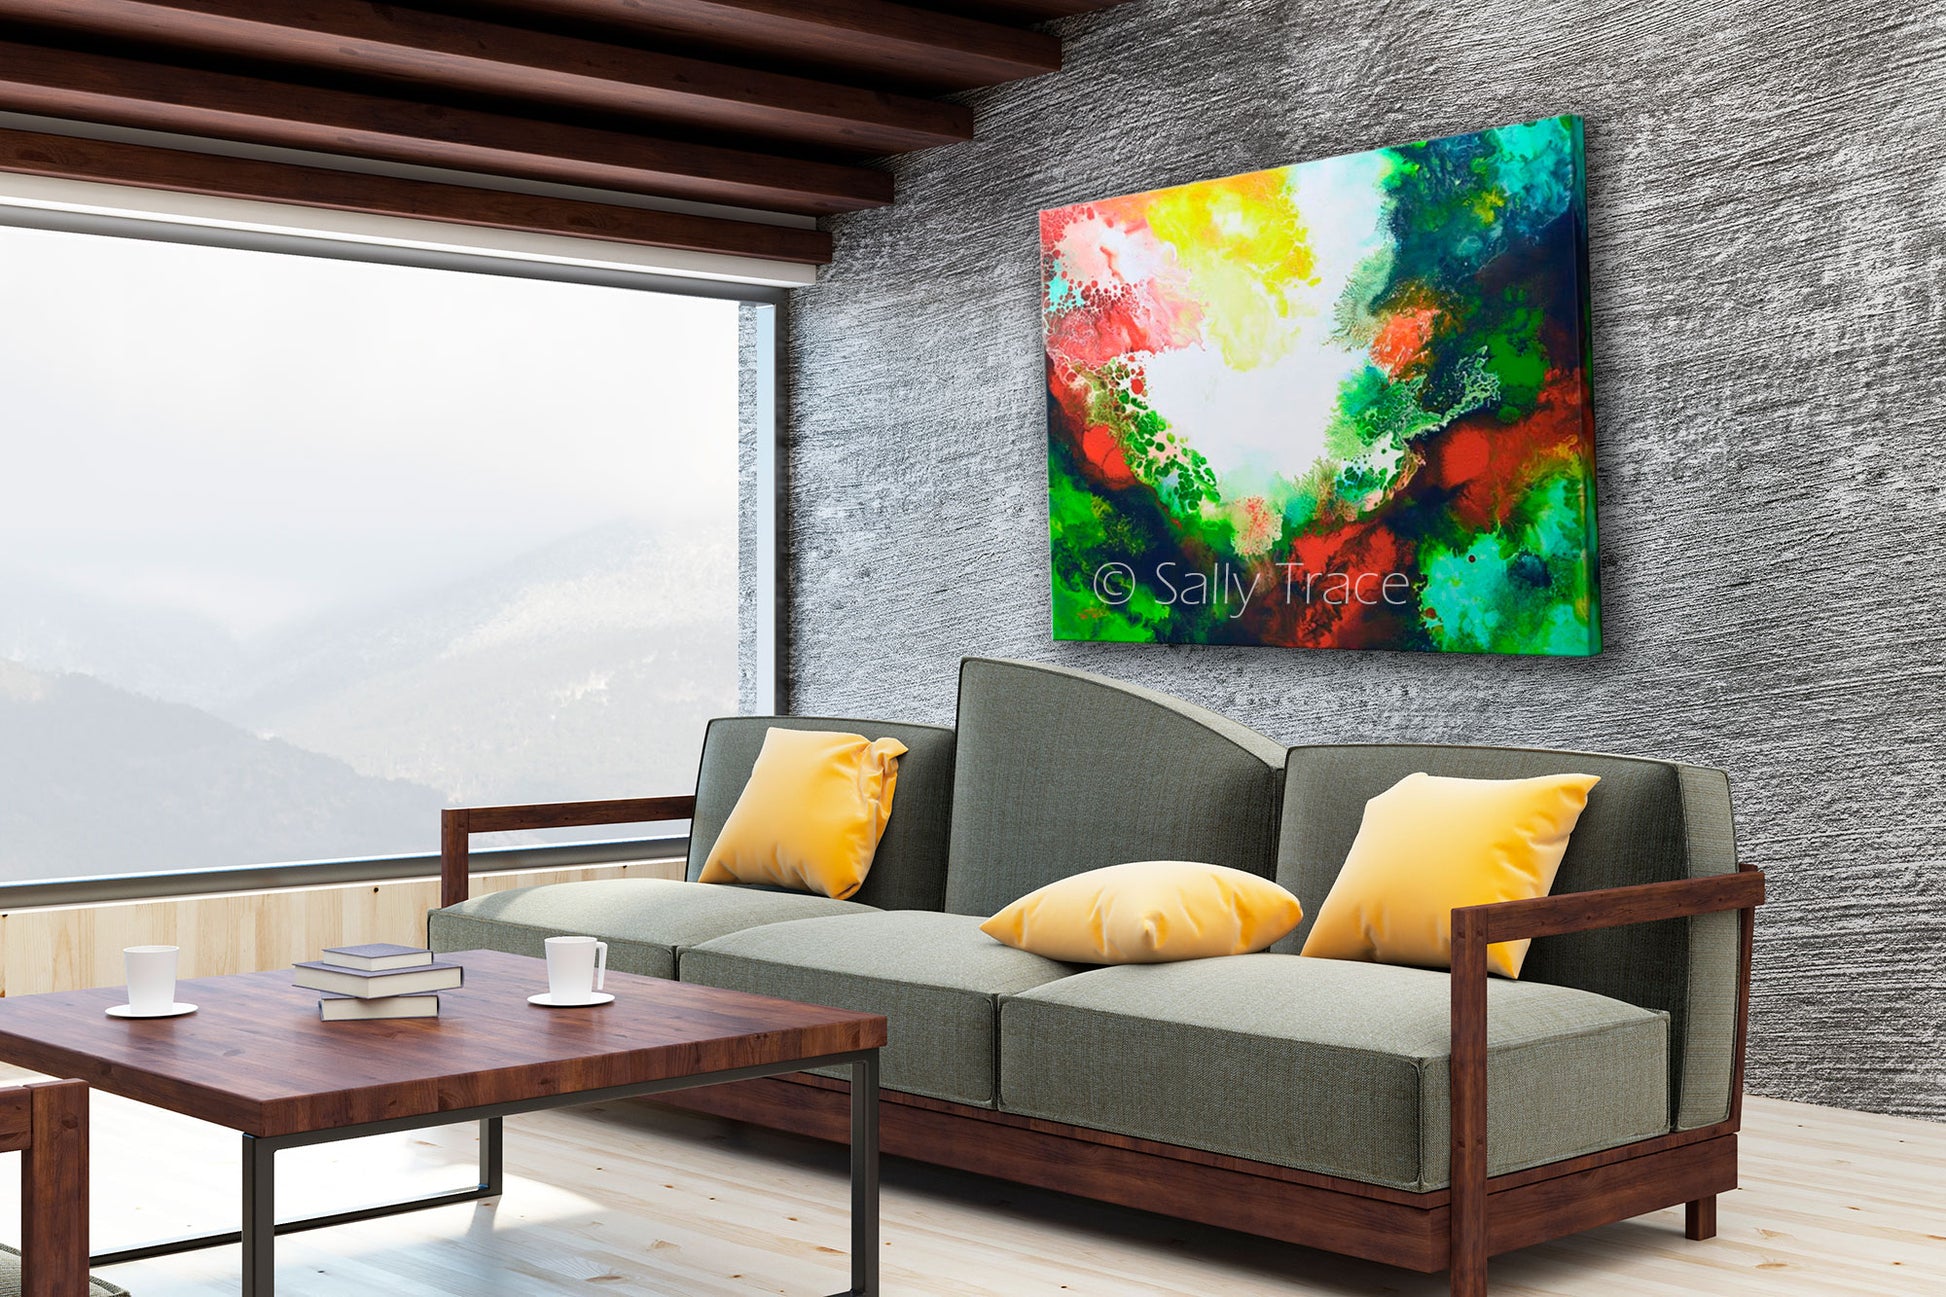 "Infusion 2" by Sally Trace, a giclee print on stretched canvas made from Sally's original modern art, contemporary fluid art abstract acrylic painting, room view